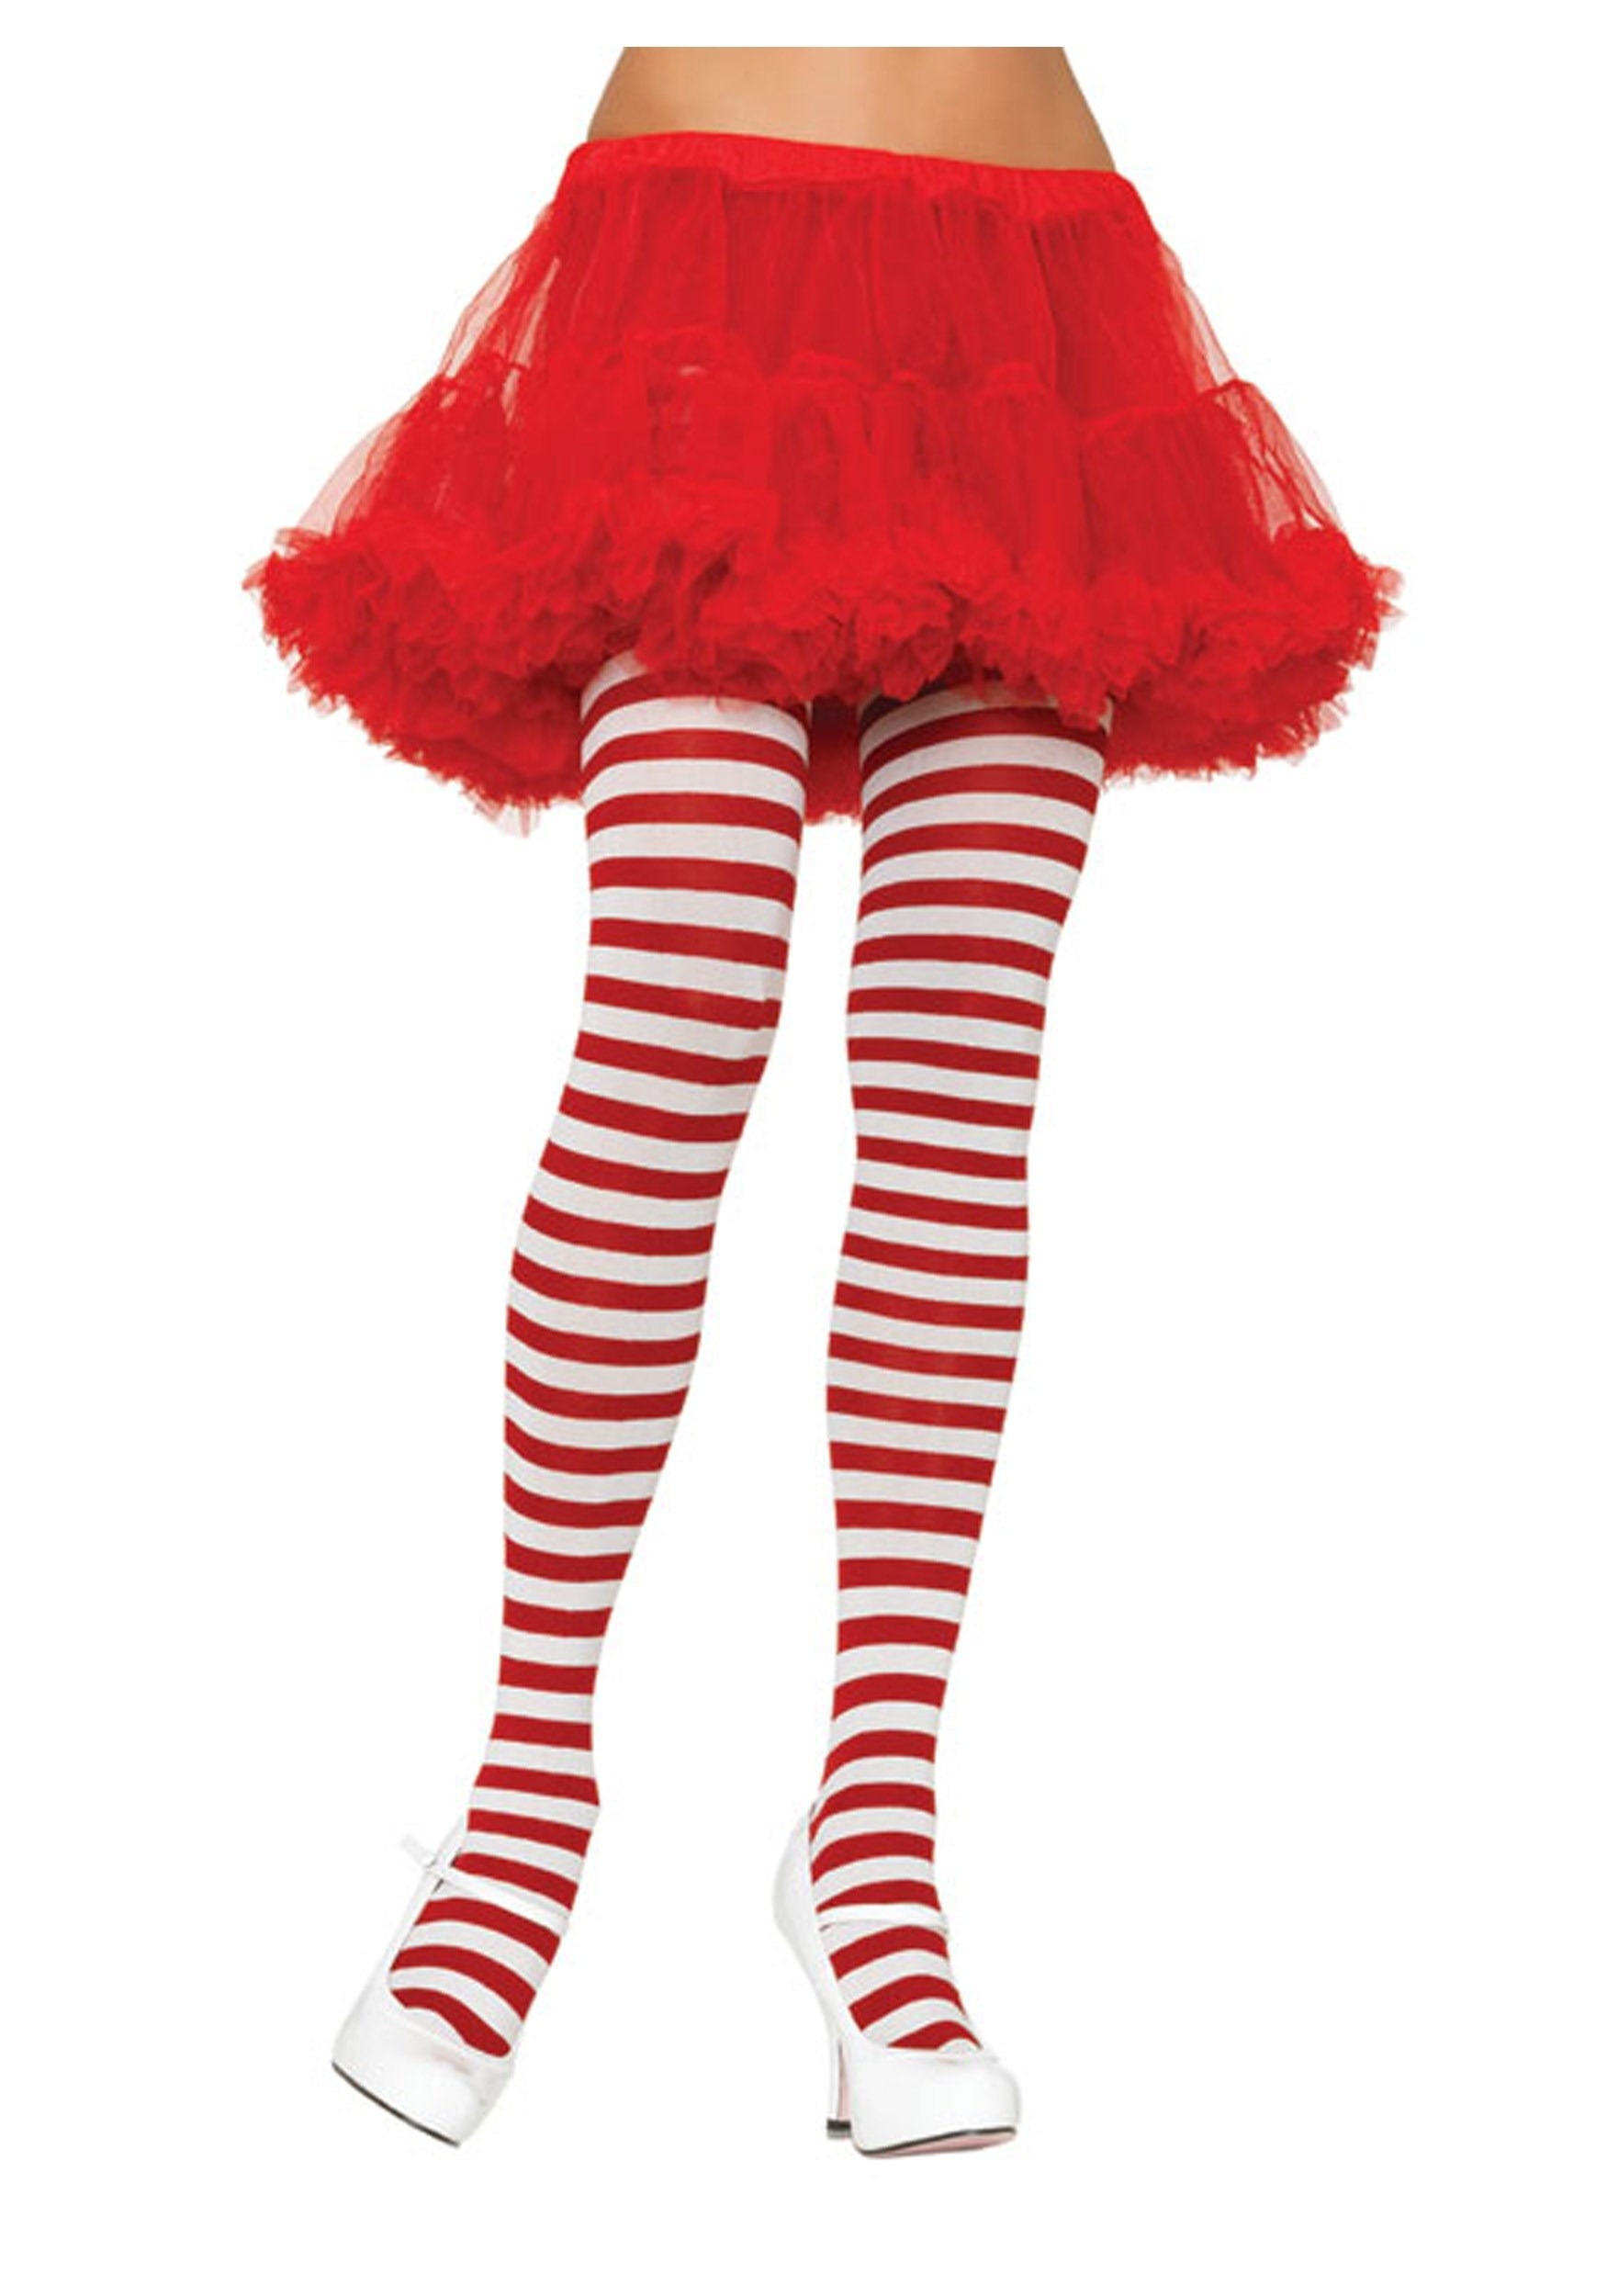 White and Red Striped Tights